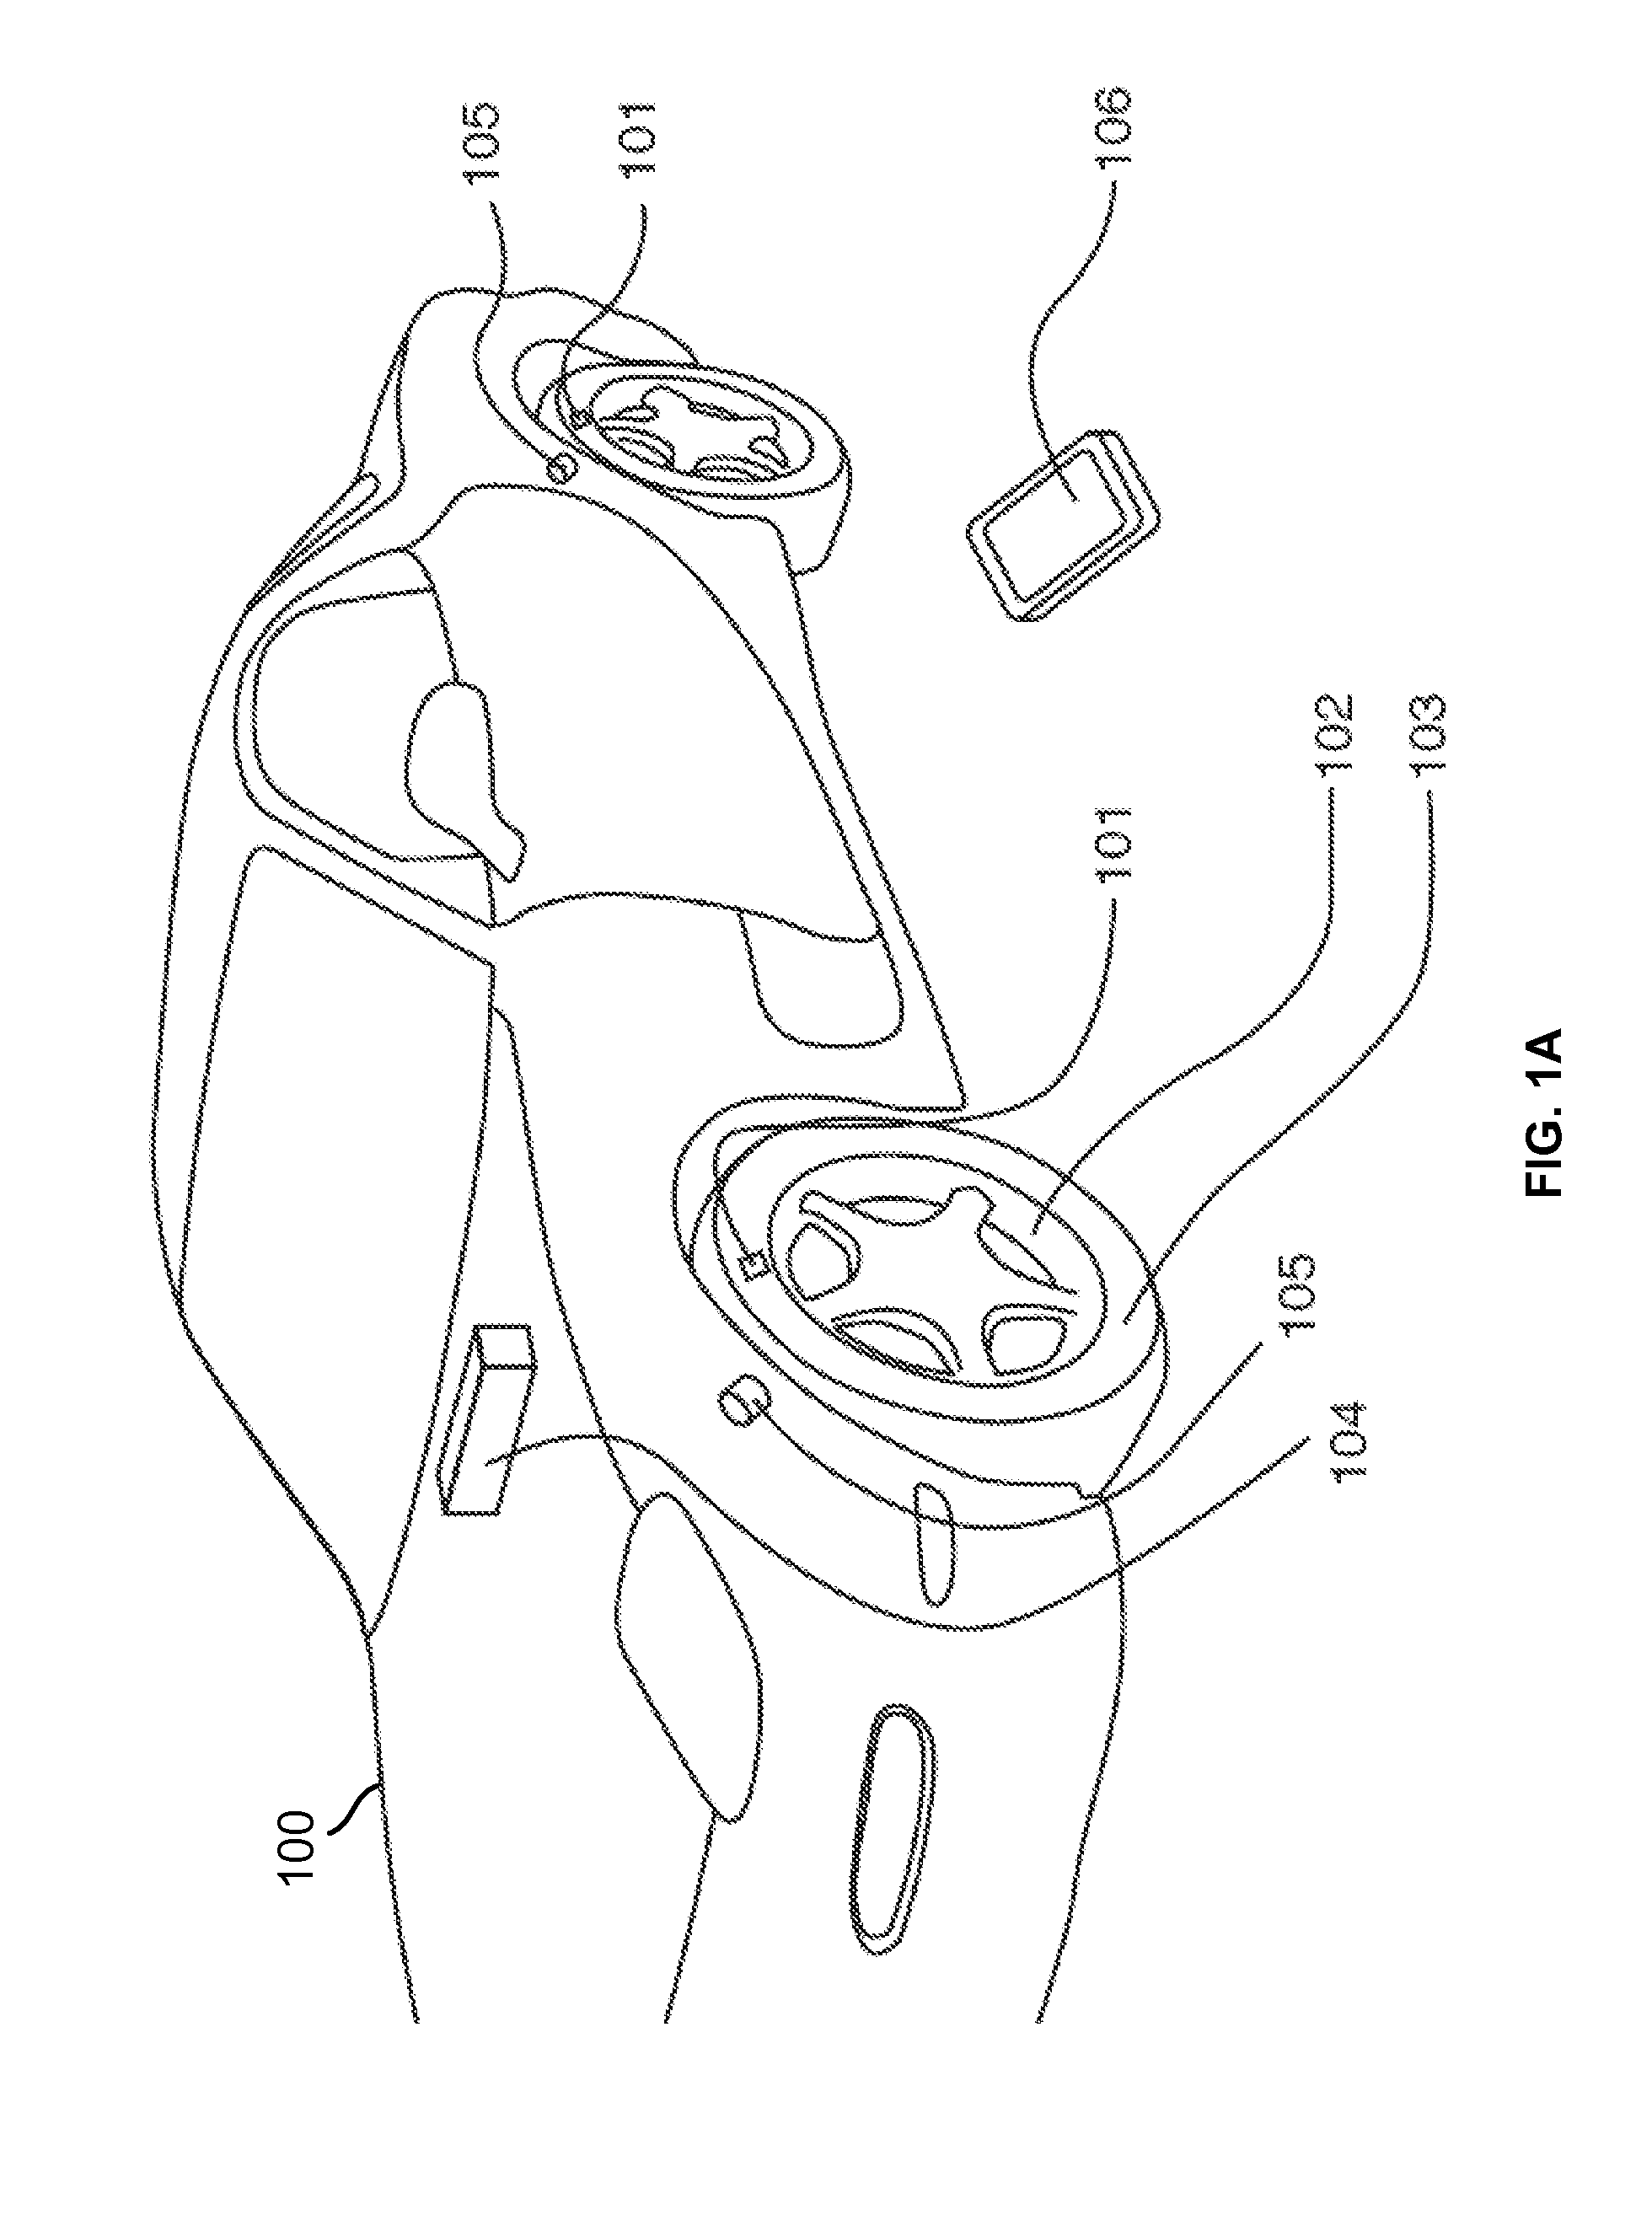 Method and Apparatus for Tire Pressure Monitoring